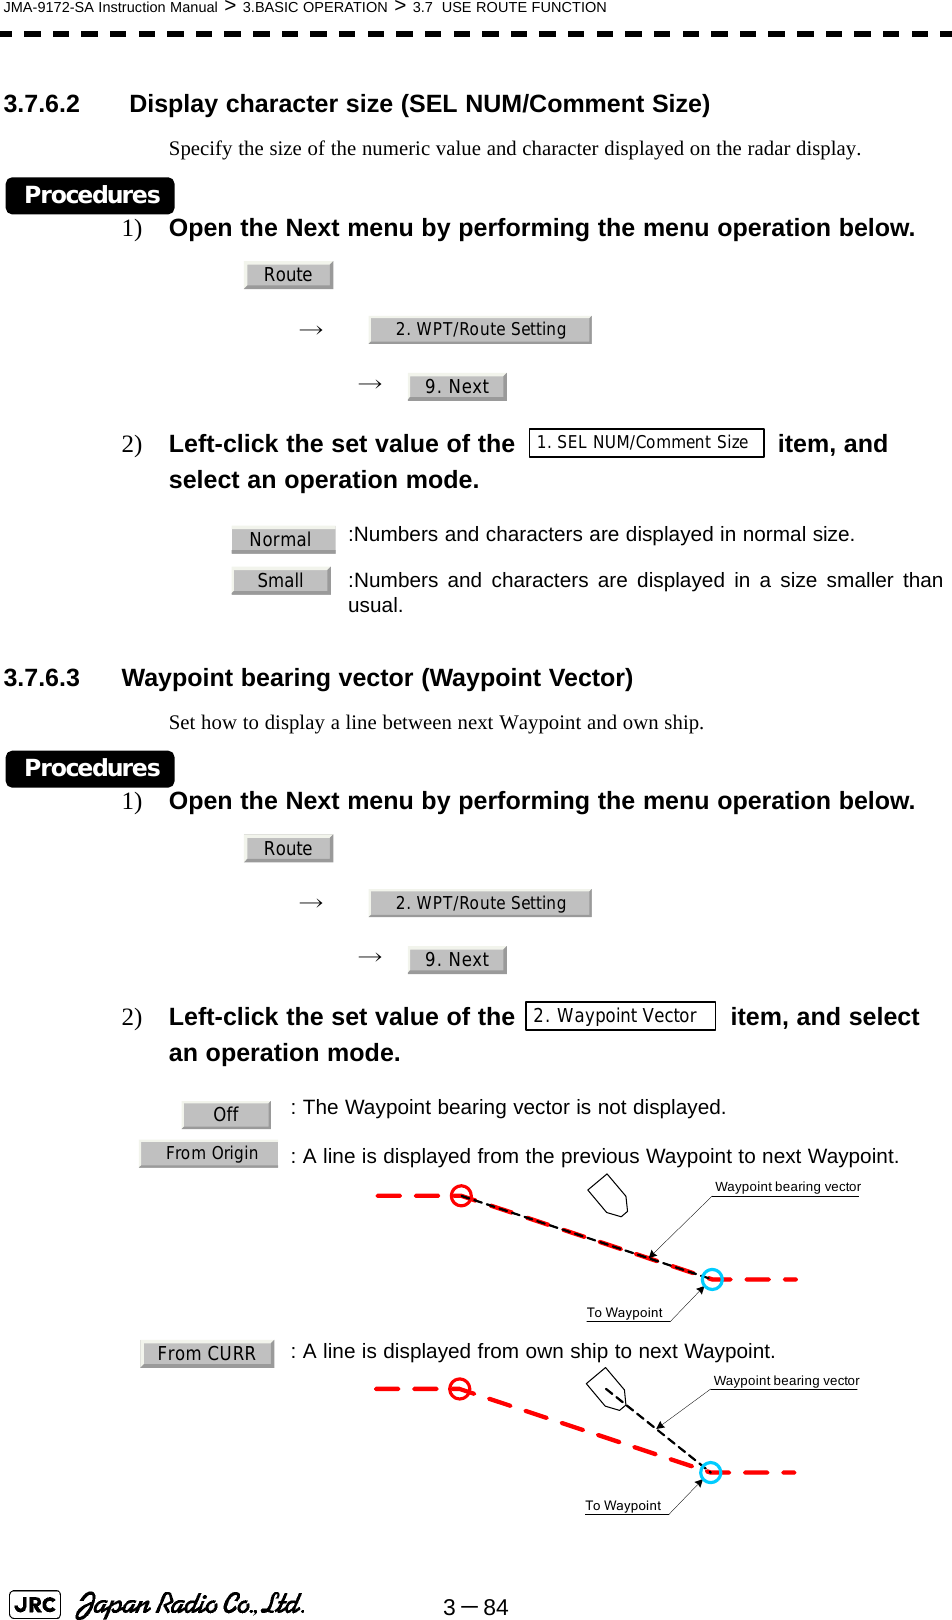 3－84JMA-9172-SA Instruction Manual &gt; 3.BASIC OPERATION &gt; 3.7  USE ROUTE FUNCTION3.7.6.2  Display character size (SEL NUM/Comment Size)Specify the size of the numeric value and character displayed on the radar display.Procedures1) Open the Next menu by performing the menu operation below.→　→　2) Left-click the set value of the item, and select an operation mode. 3.7.6.3 Waypoint bearing vector (Waypoint Vector)Set how to display a line between next Waypoint and own ship.Procedures1) Open the Next menu by performing the menu operation below.→　→　2) Left-click the set value of the   item, and select an operation mode. :Numbers and characters are displayed in normal size.  :Numbers and characters are displayed in a size smaller thanusual.: The Waypoint bearing vector is not displayed.: A line is displayed from the previous Waypoint to next Waypoint.  : A line is displayed from own ship to next Waypoint.Route2. WPT/Route Setting9. Next1. SEL NUM/Comment SizeNormalSmallRoute2. WPT/Route Setting9. Next2. Waypoint VectorOffFrom OriginWaypoint bearing vectorTo WaypointFrom CURRTo WaypointWaypoint bearing vector